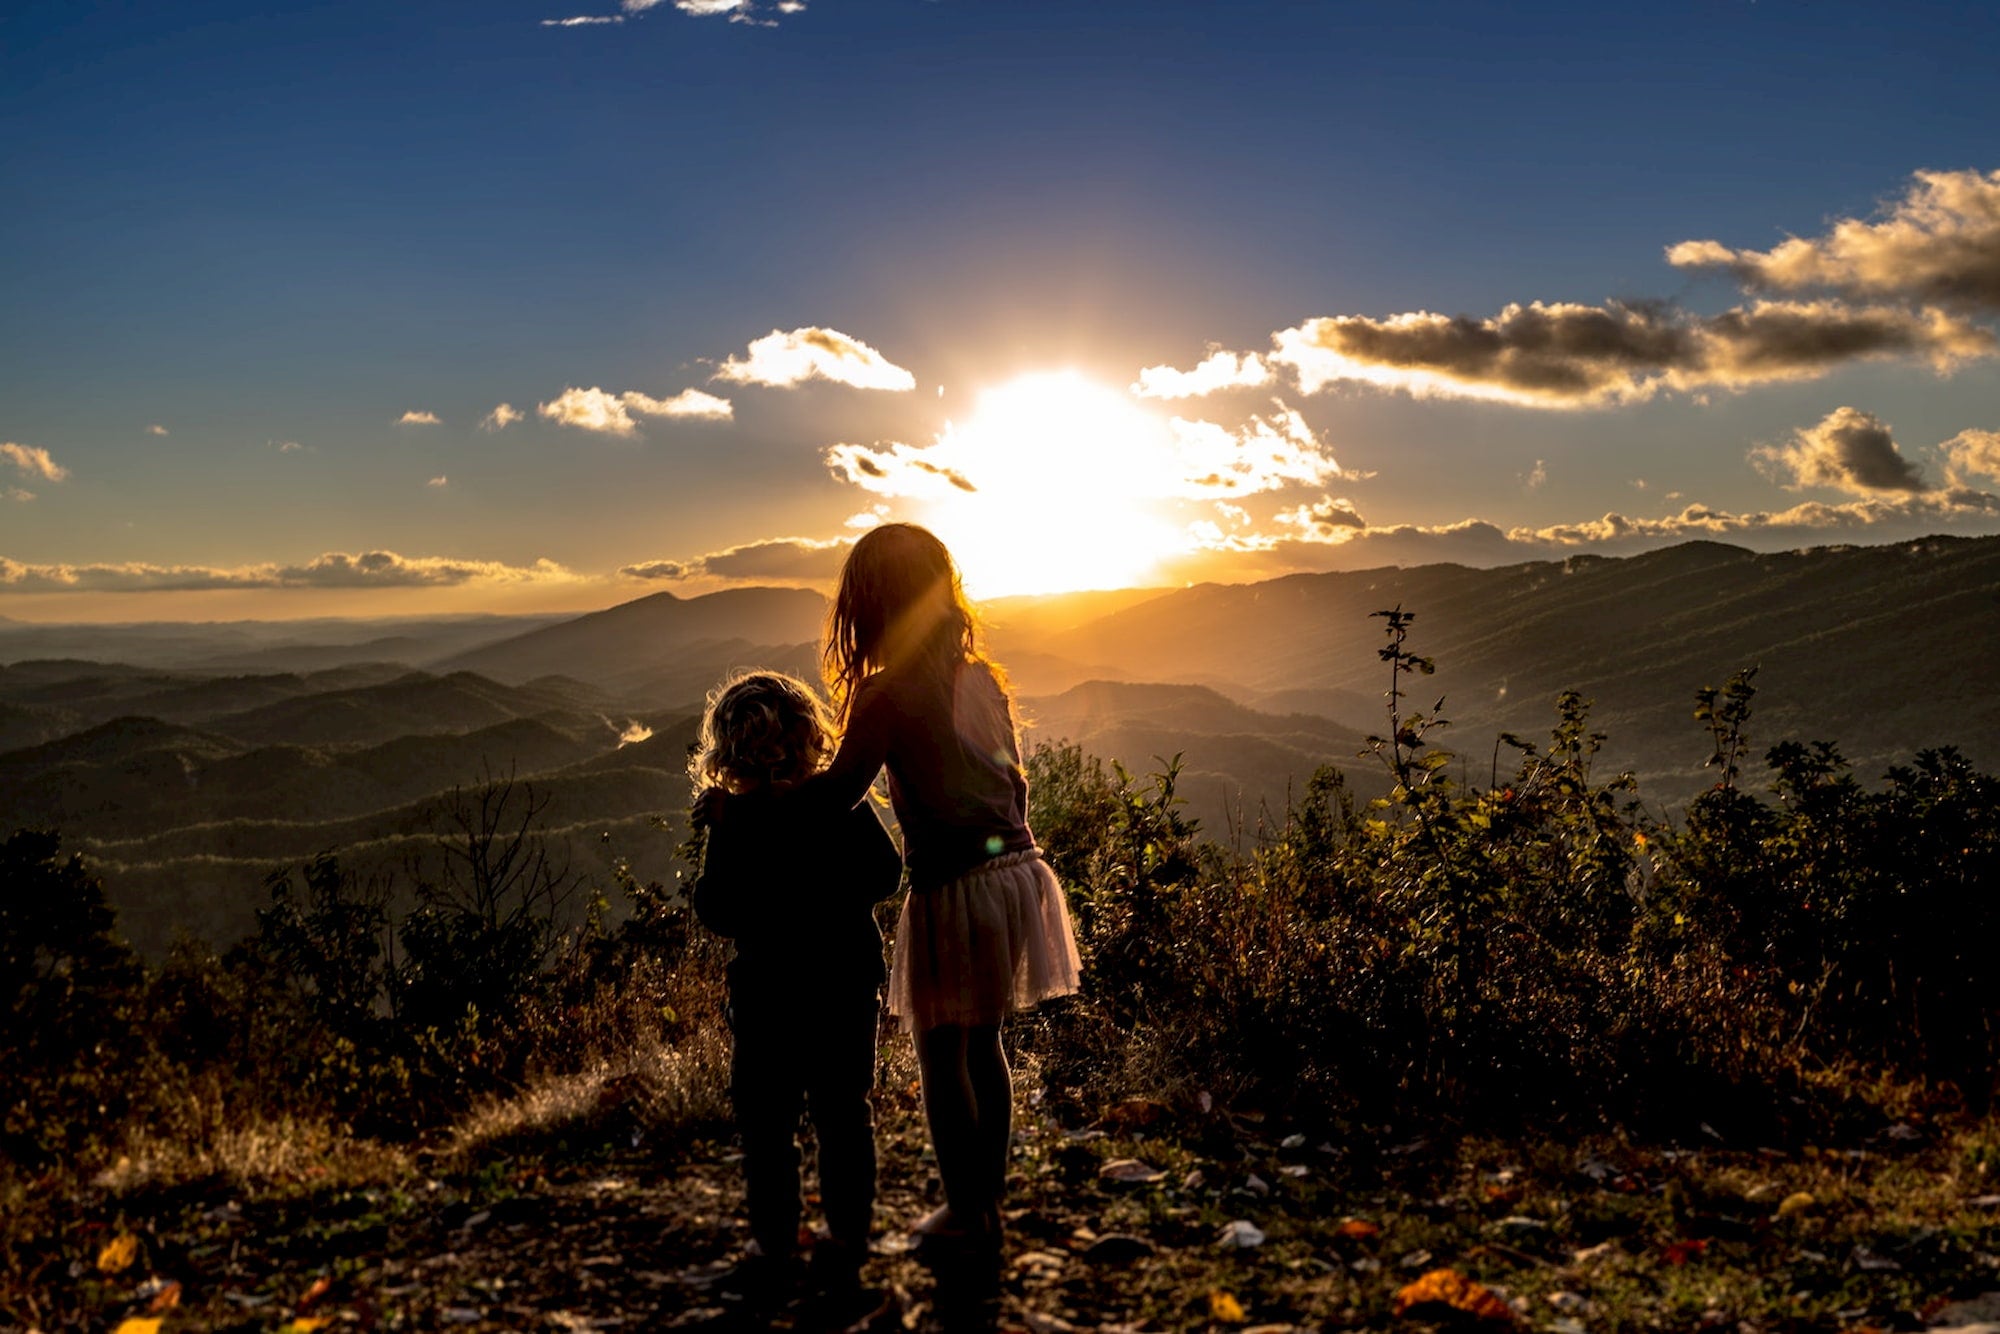 Kids watching the sunset from a mountain.